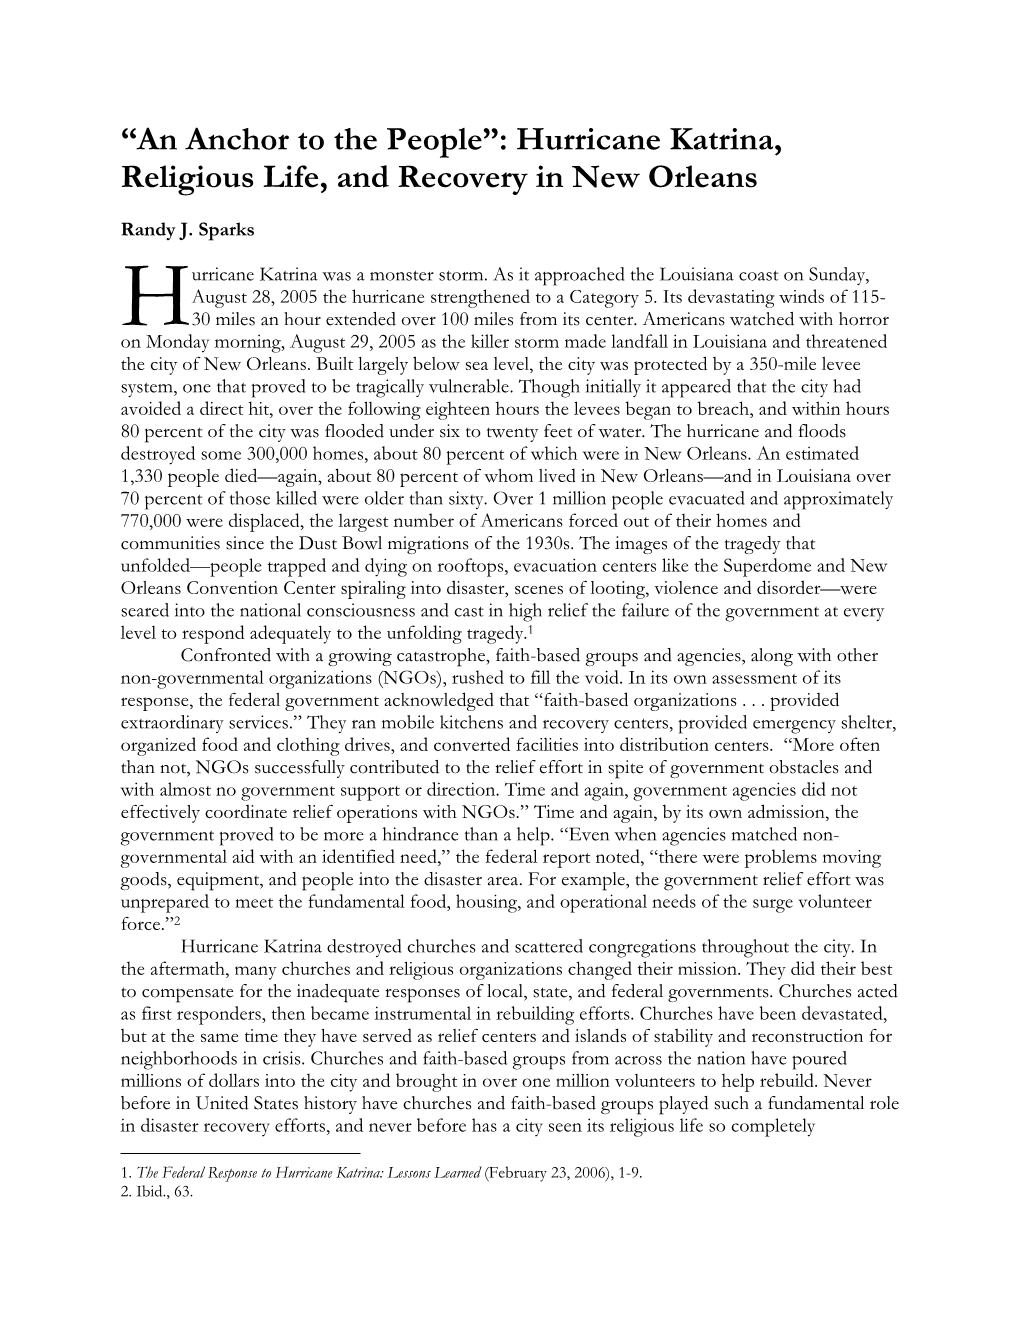 Hurricane Katrina, Religious Life, and Recovery in New Orleans